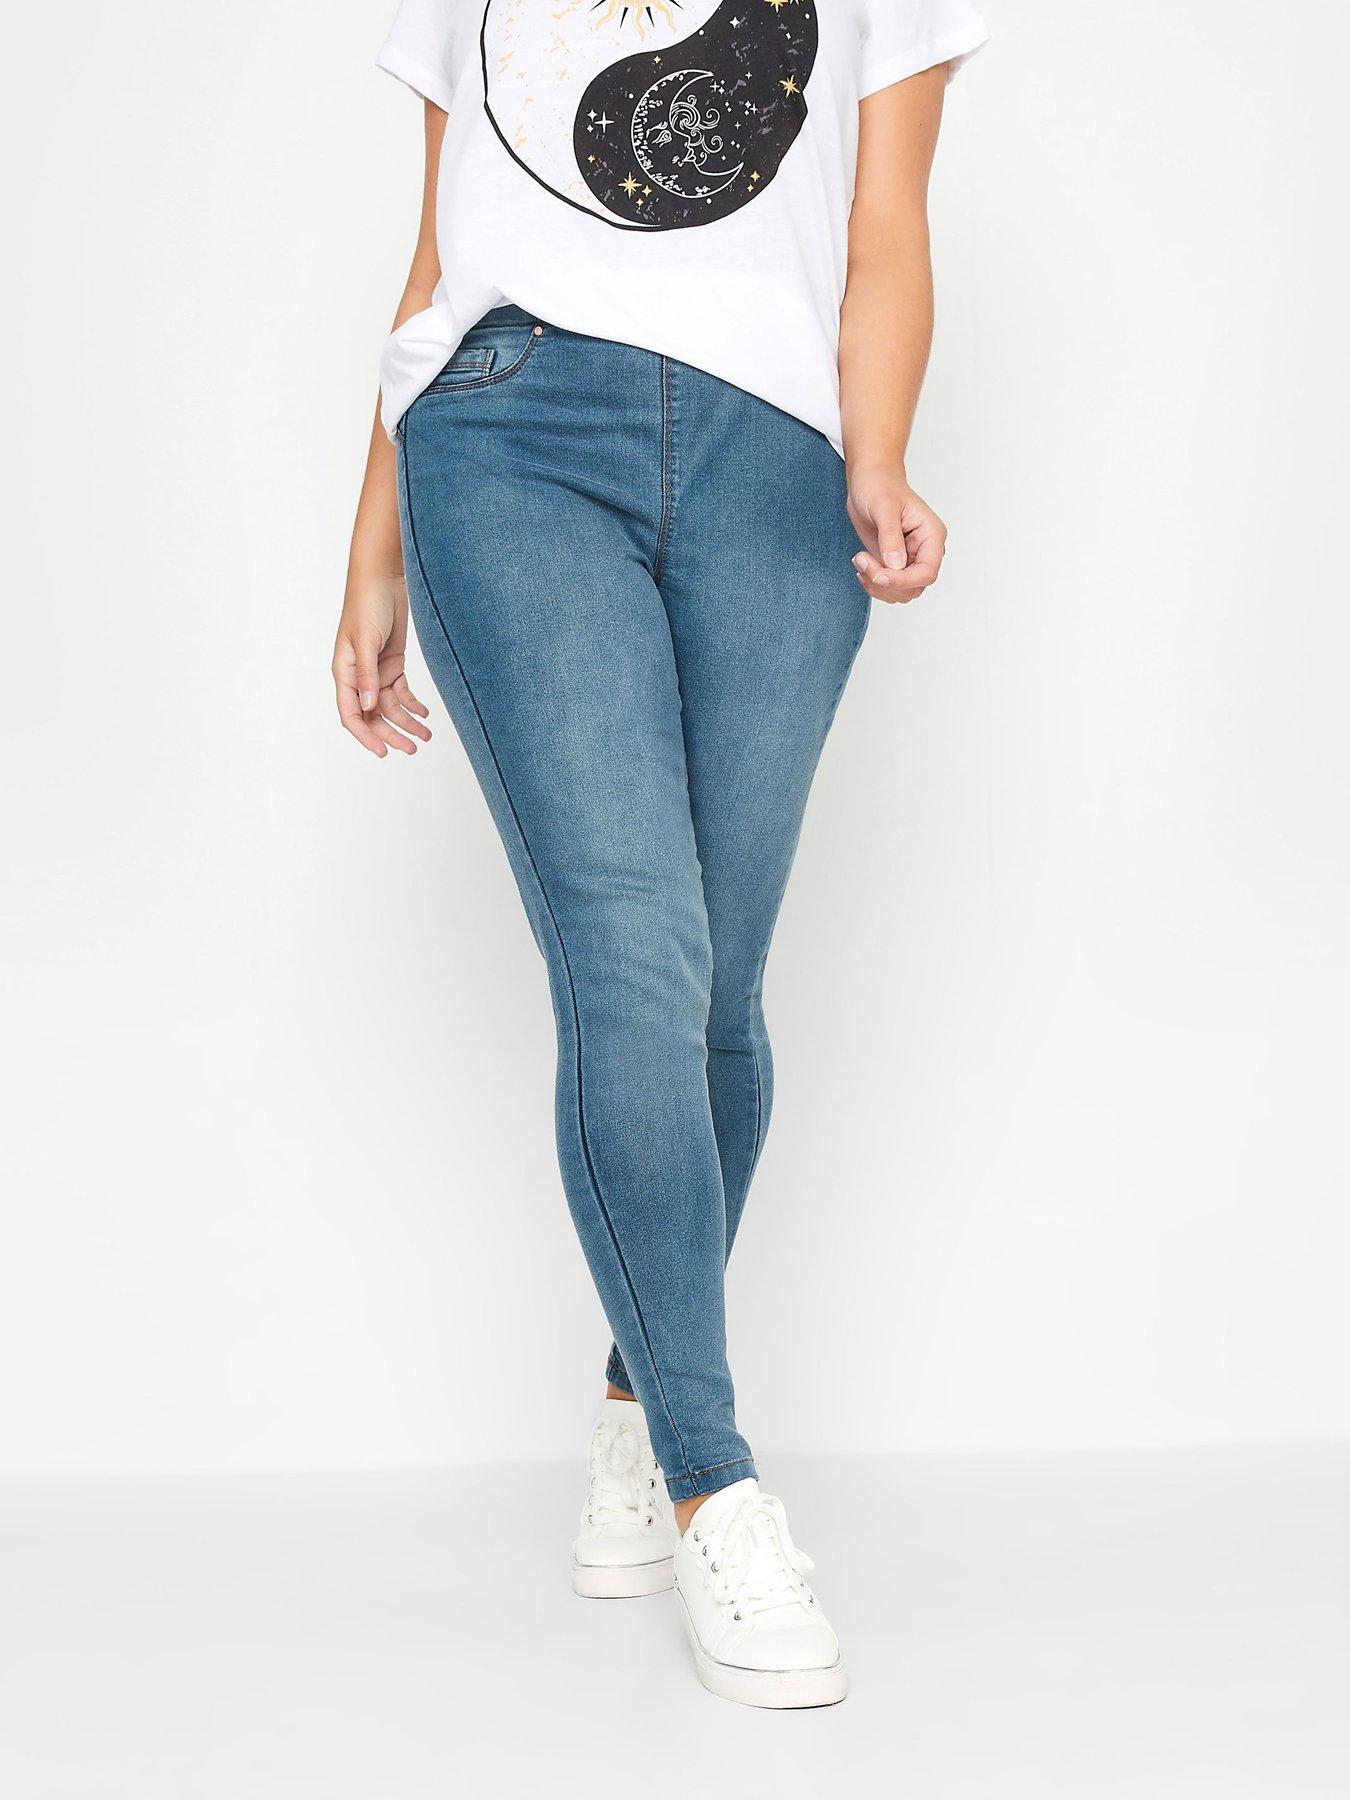 Shaper Denim Jeans - mid-rise stretch pull-on jegging in plus size